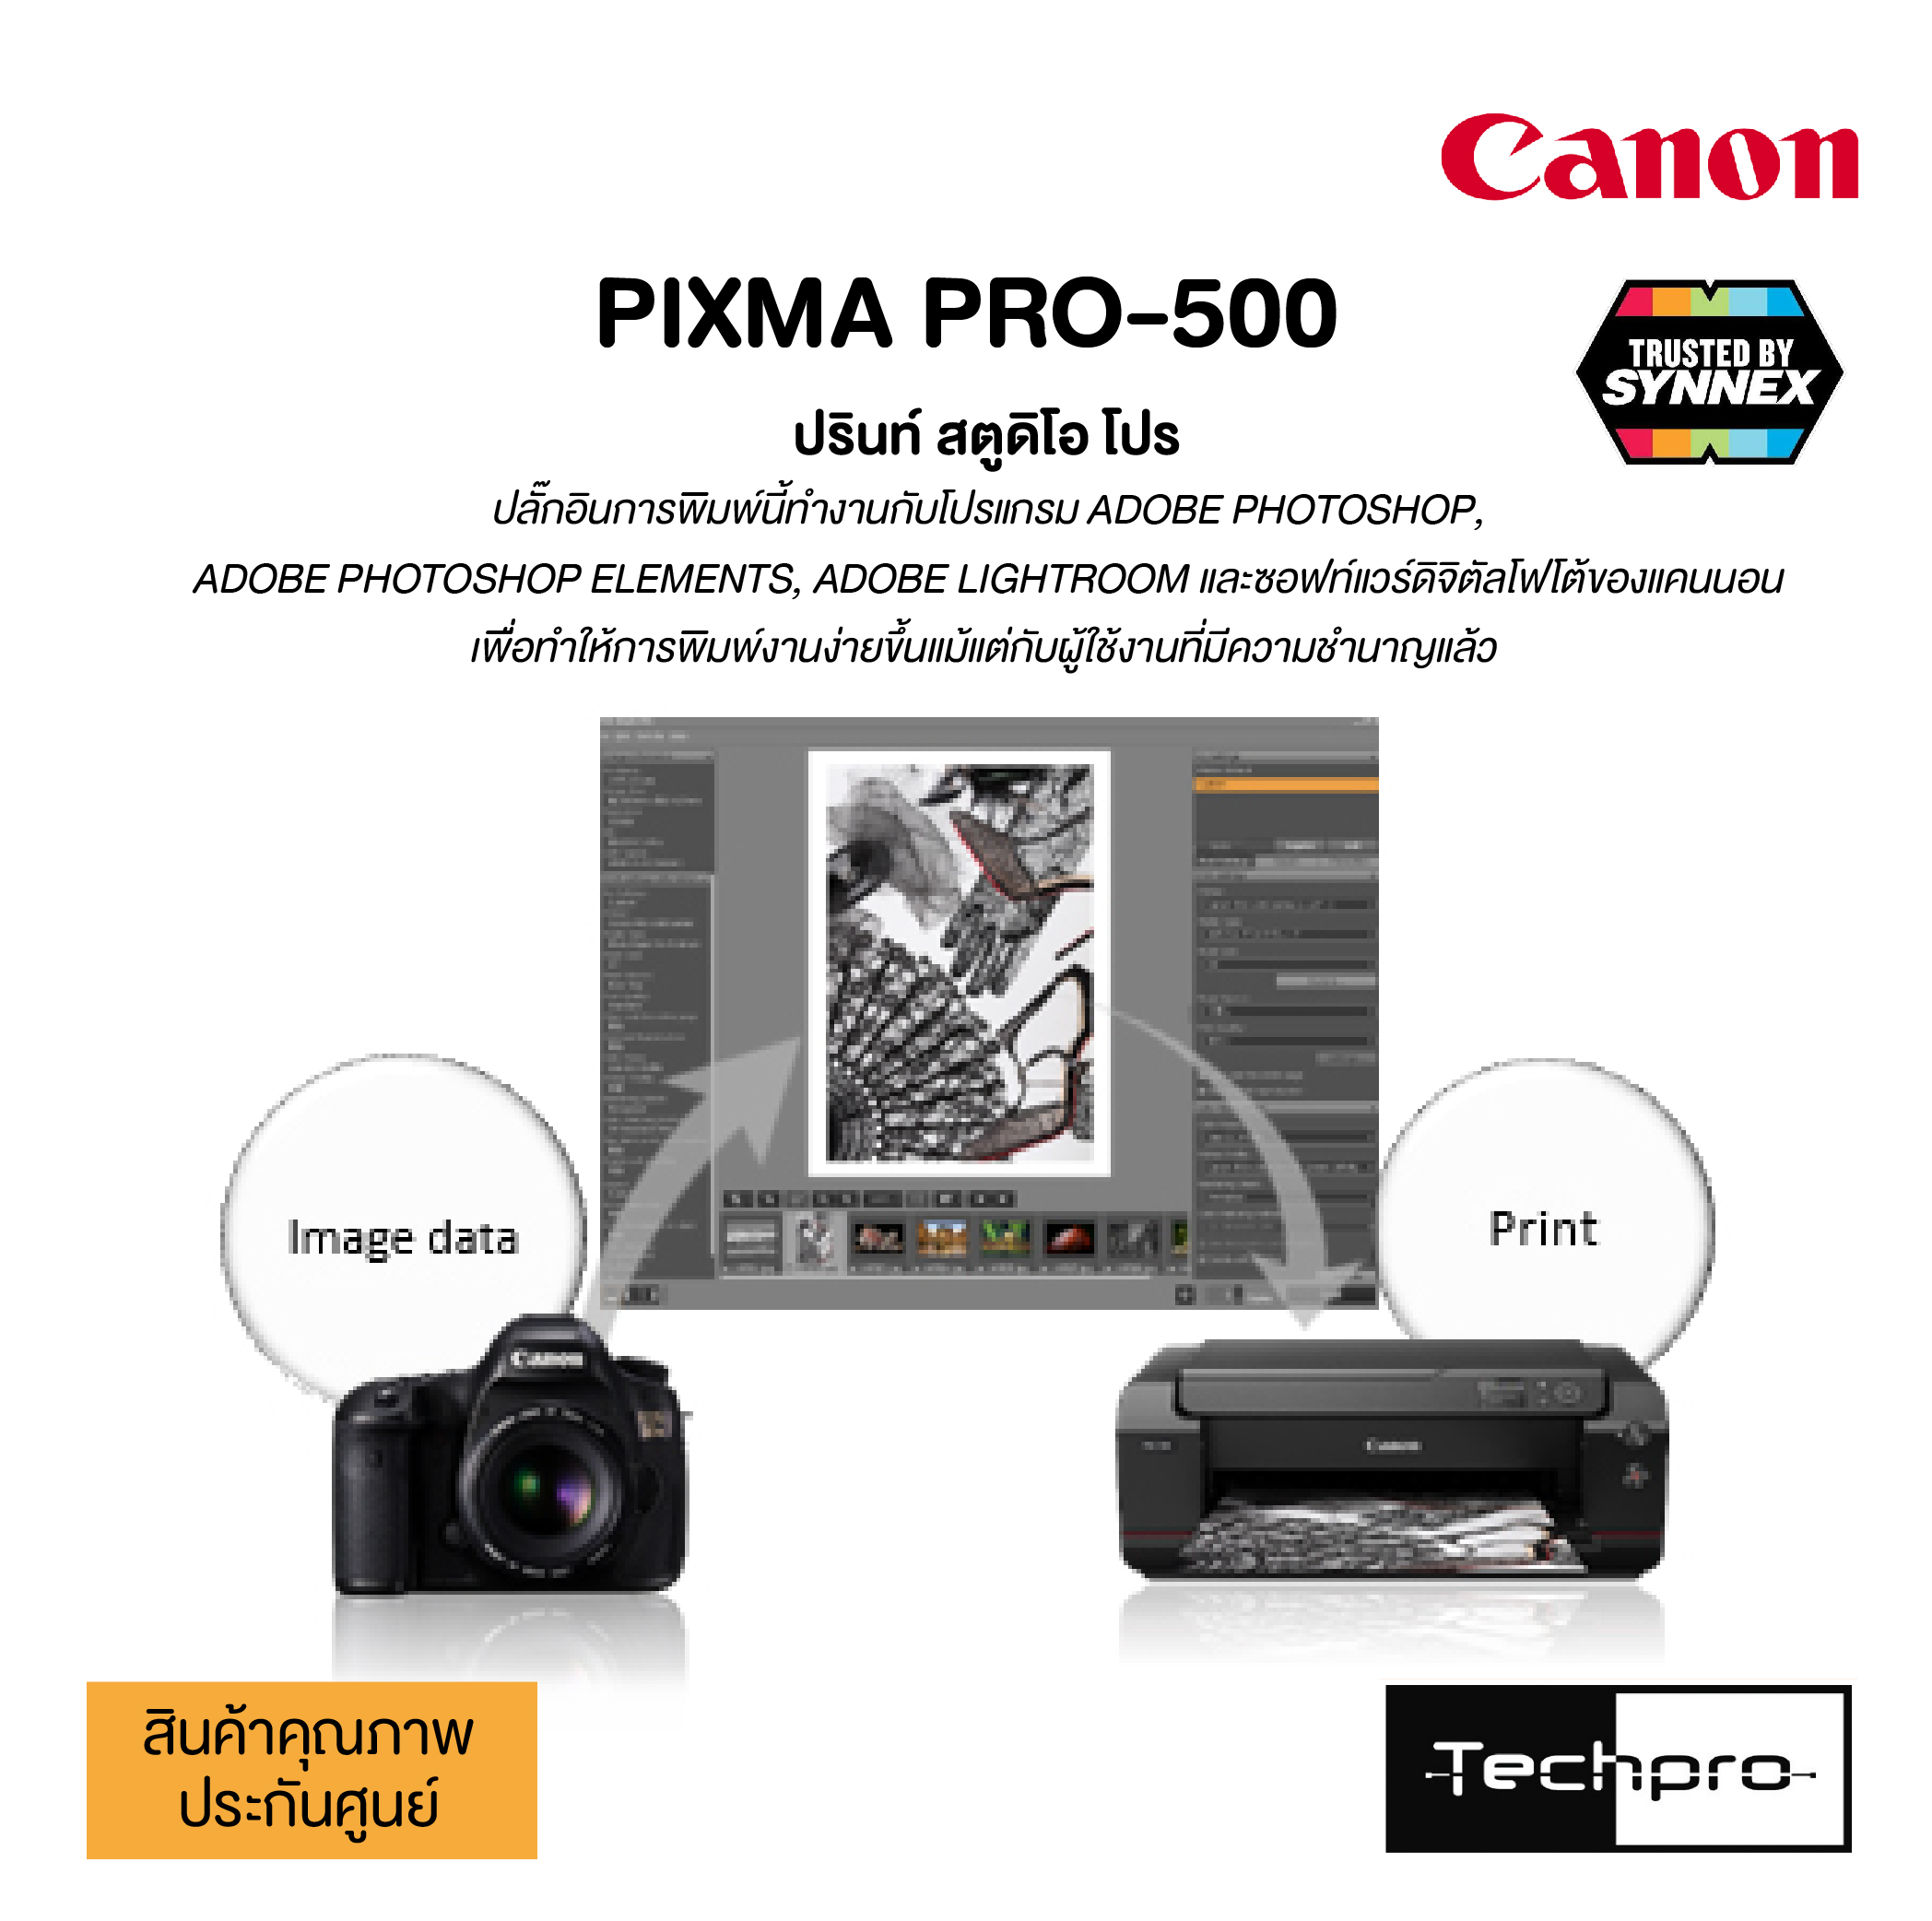 canon ipf 500 driver for mac